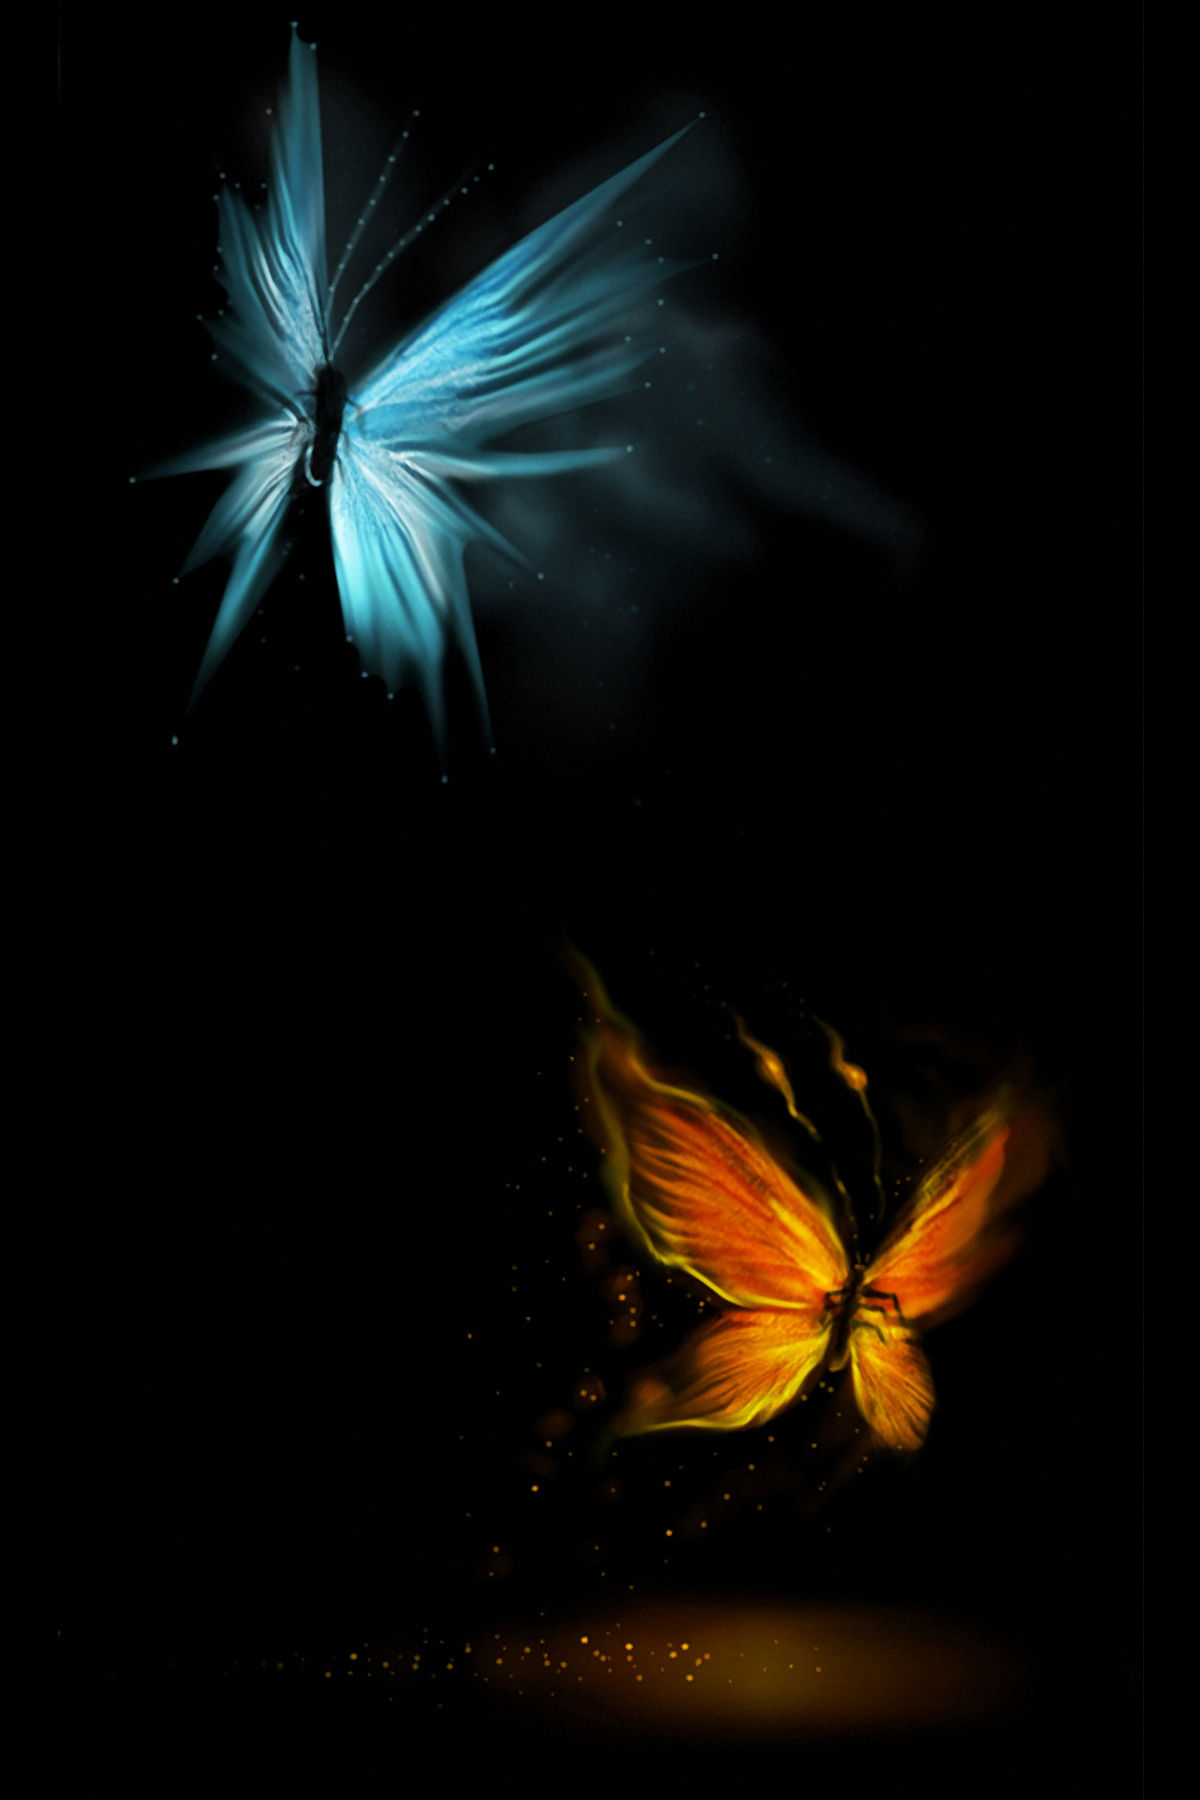 Butterfly Wallpaper For Android Free Animated Images - Classic Wallpaper Hd  For Mobile - 846x1269 Wallpaper 